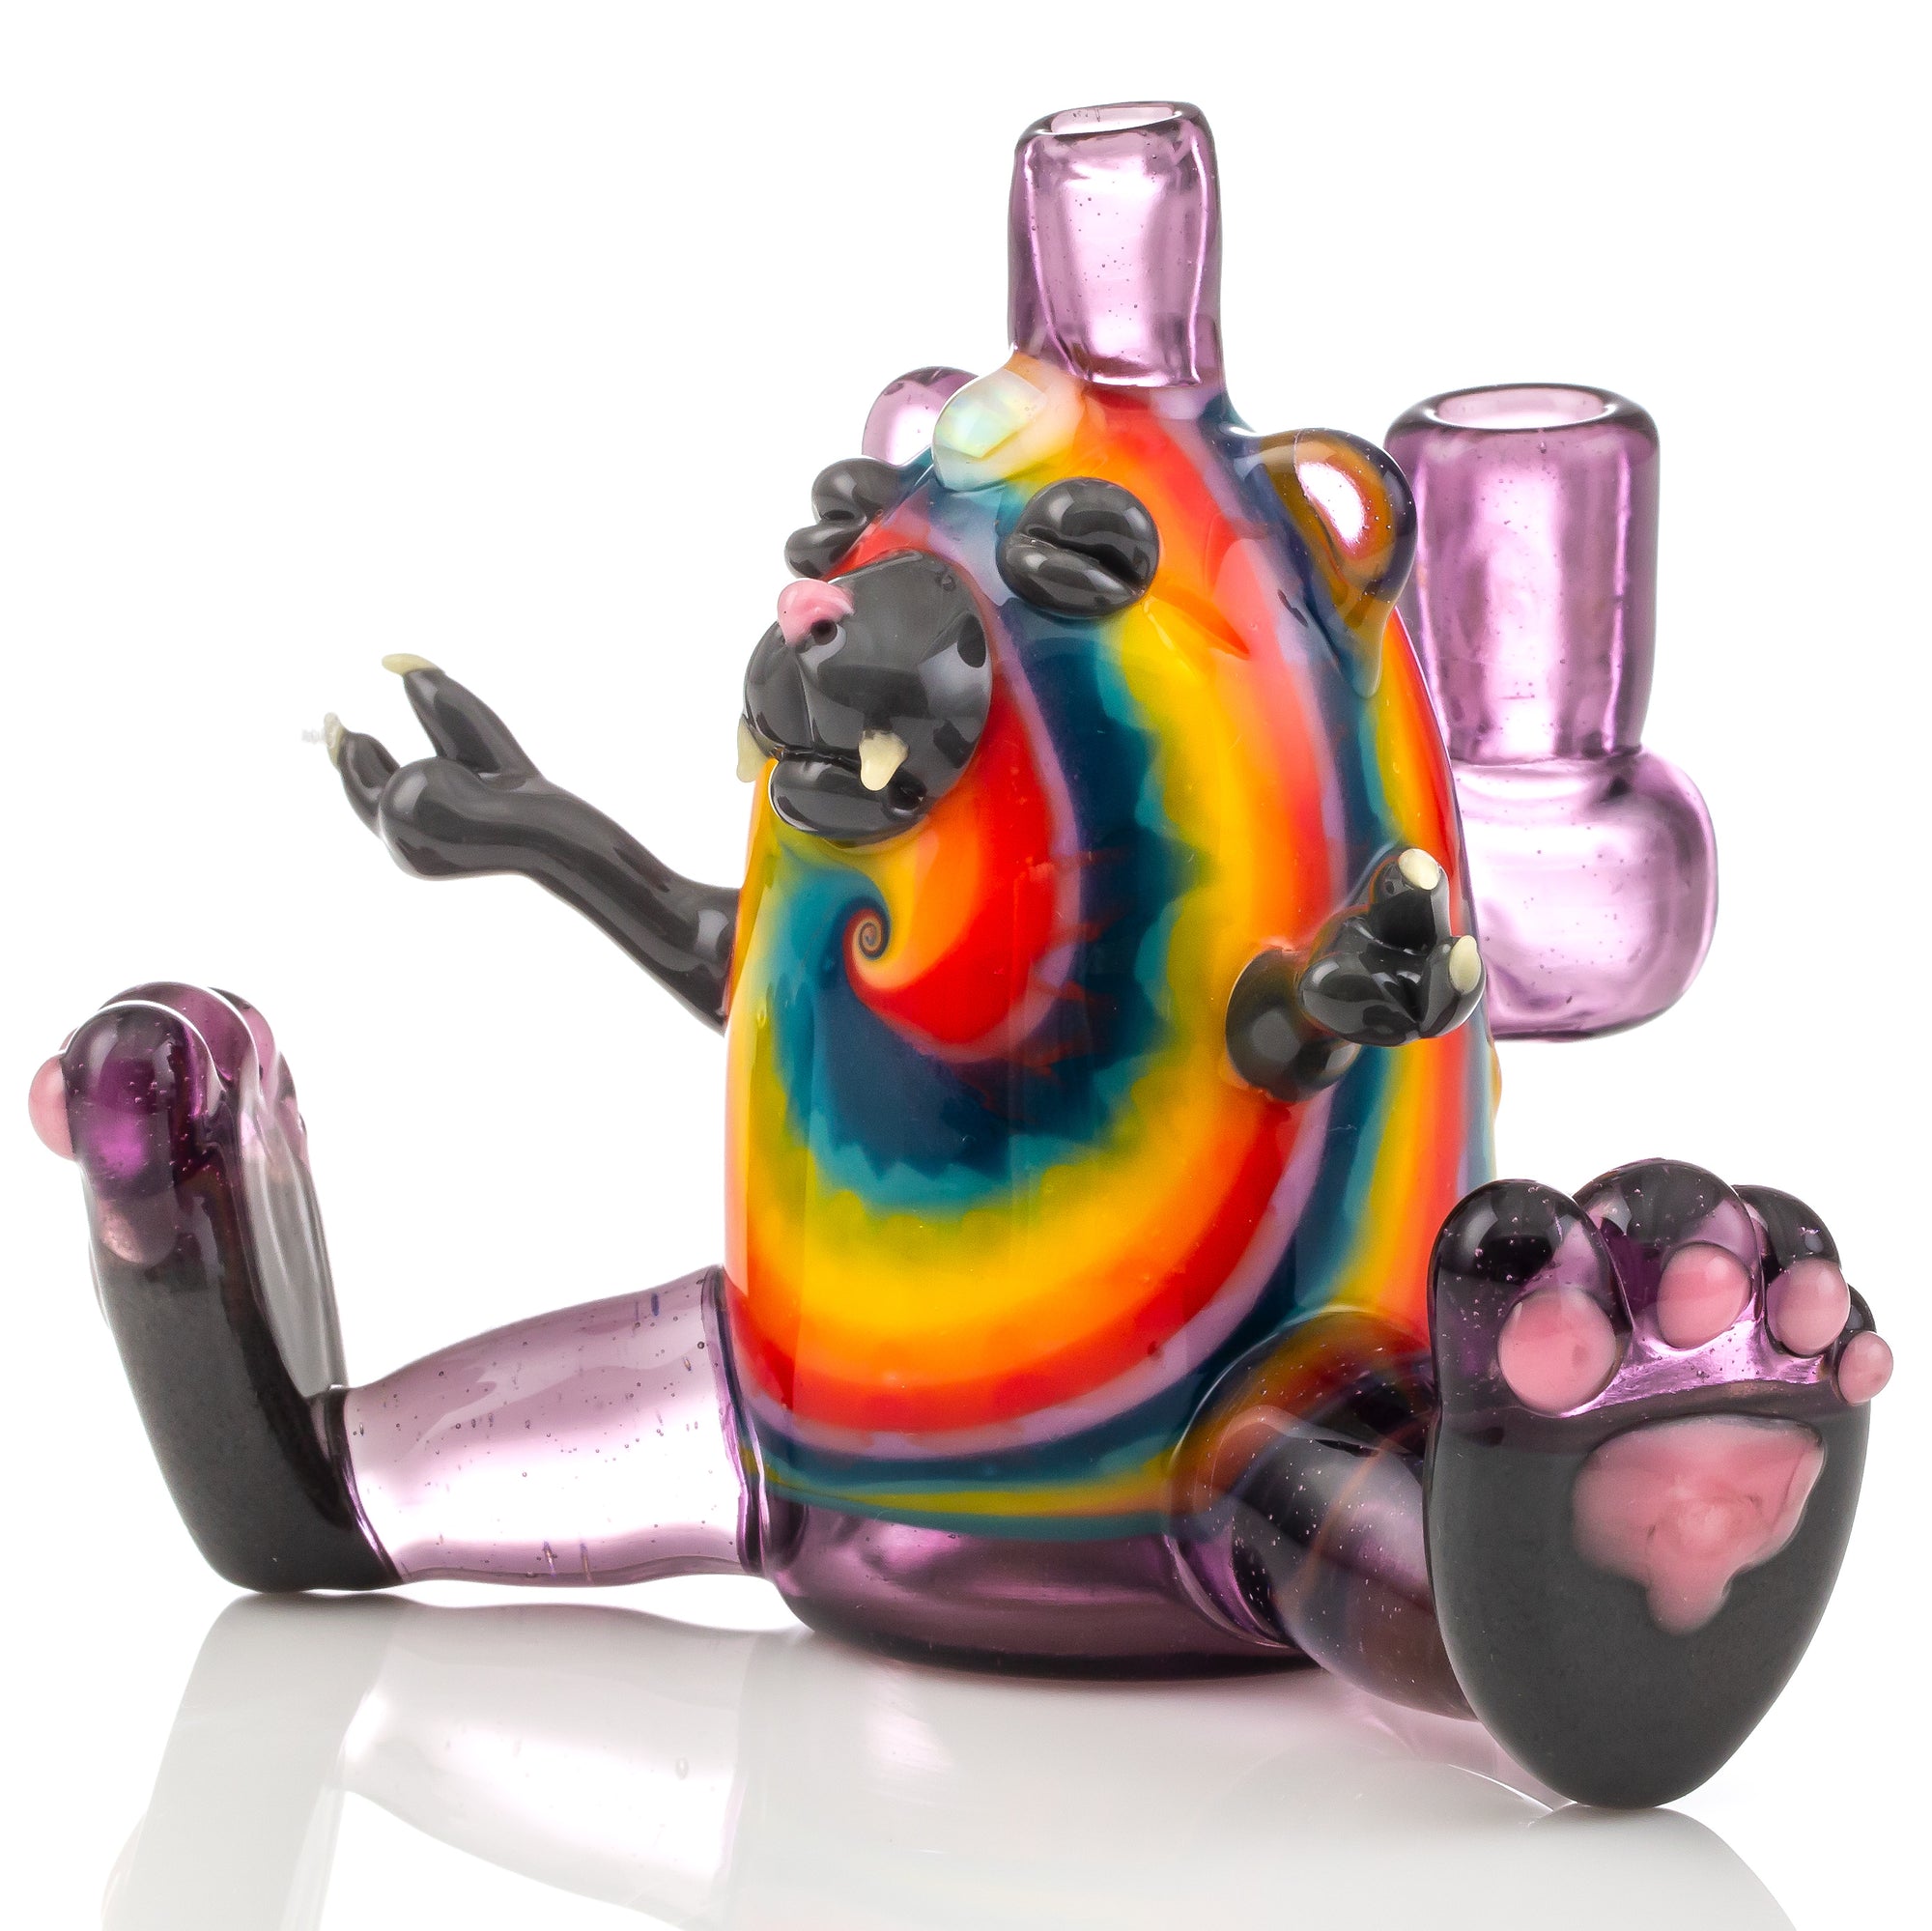 R3G15 Heady Glass Litty Kitty wearing Tie Dye Shirt, shown in a studio photo with a white background. 